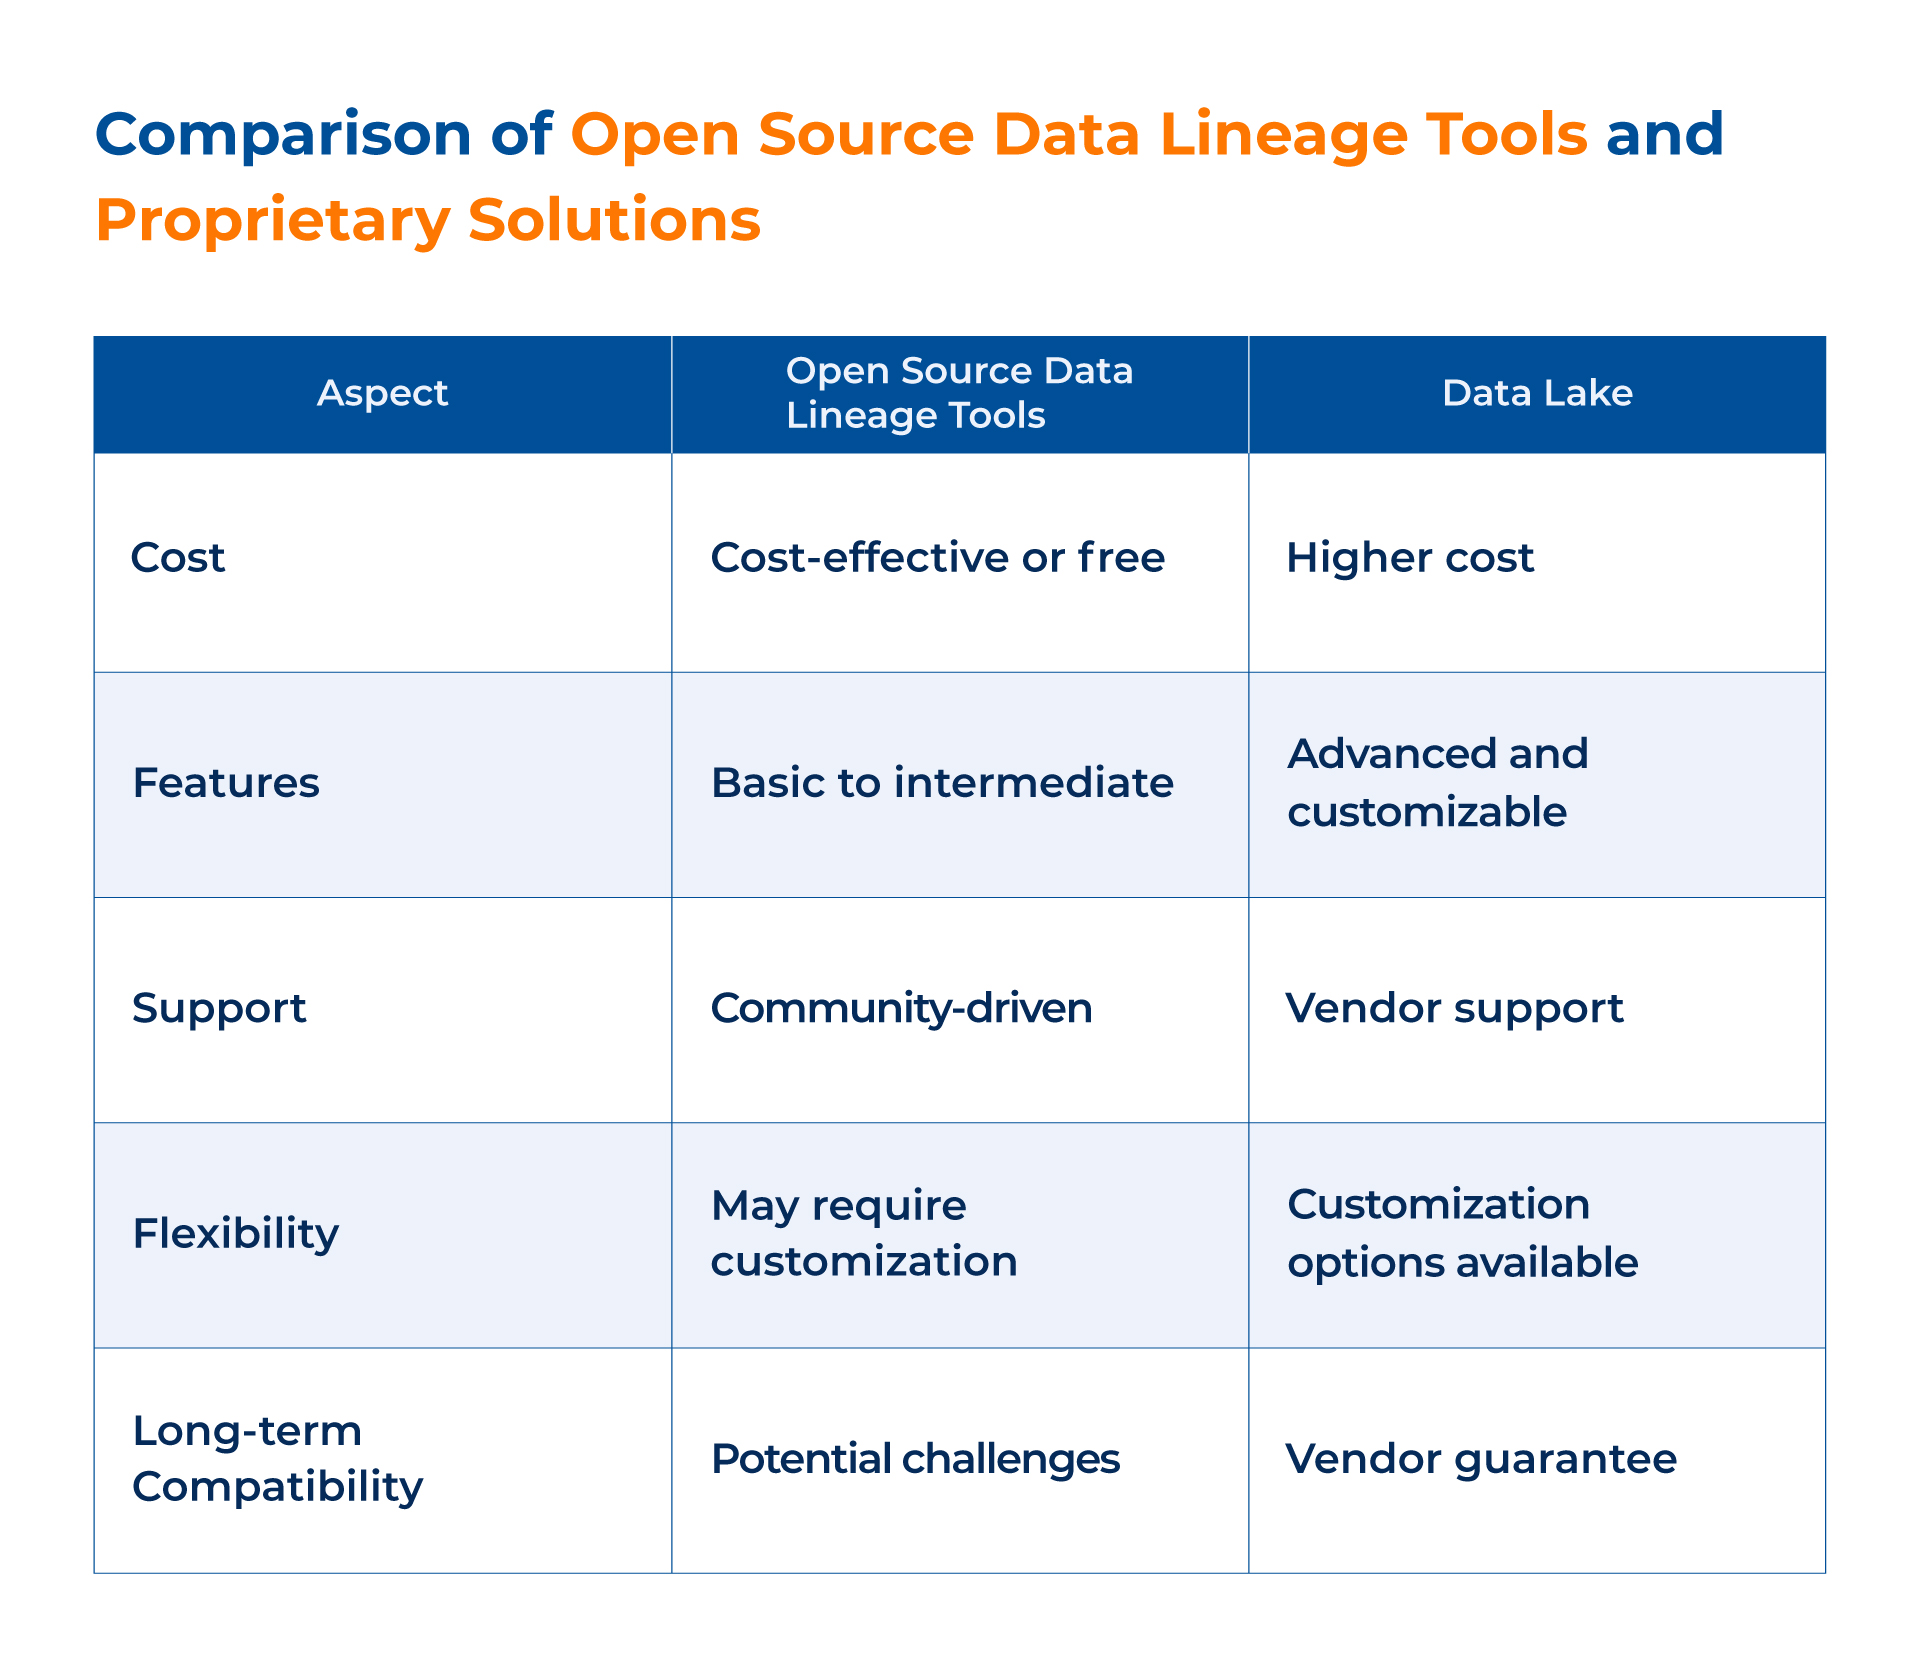 Open Source Data Lineage Tools vs. Proprietary Solutions